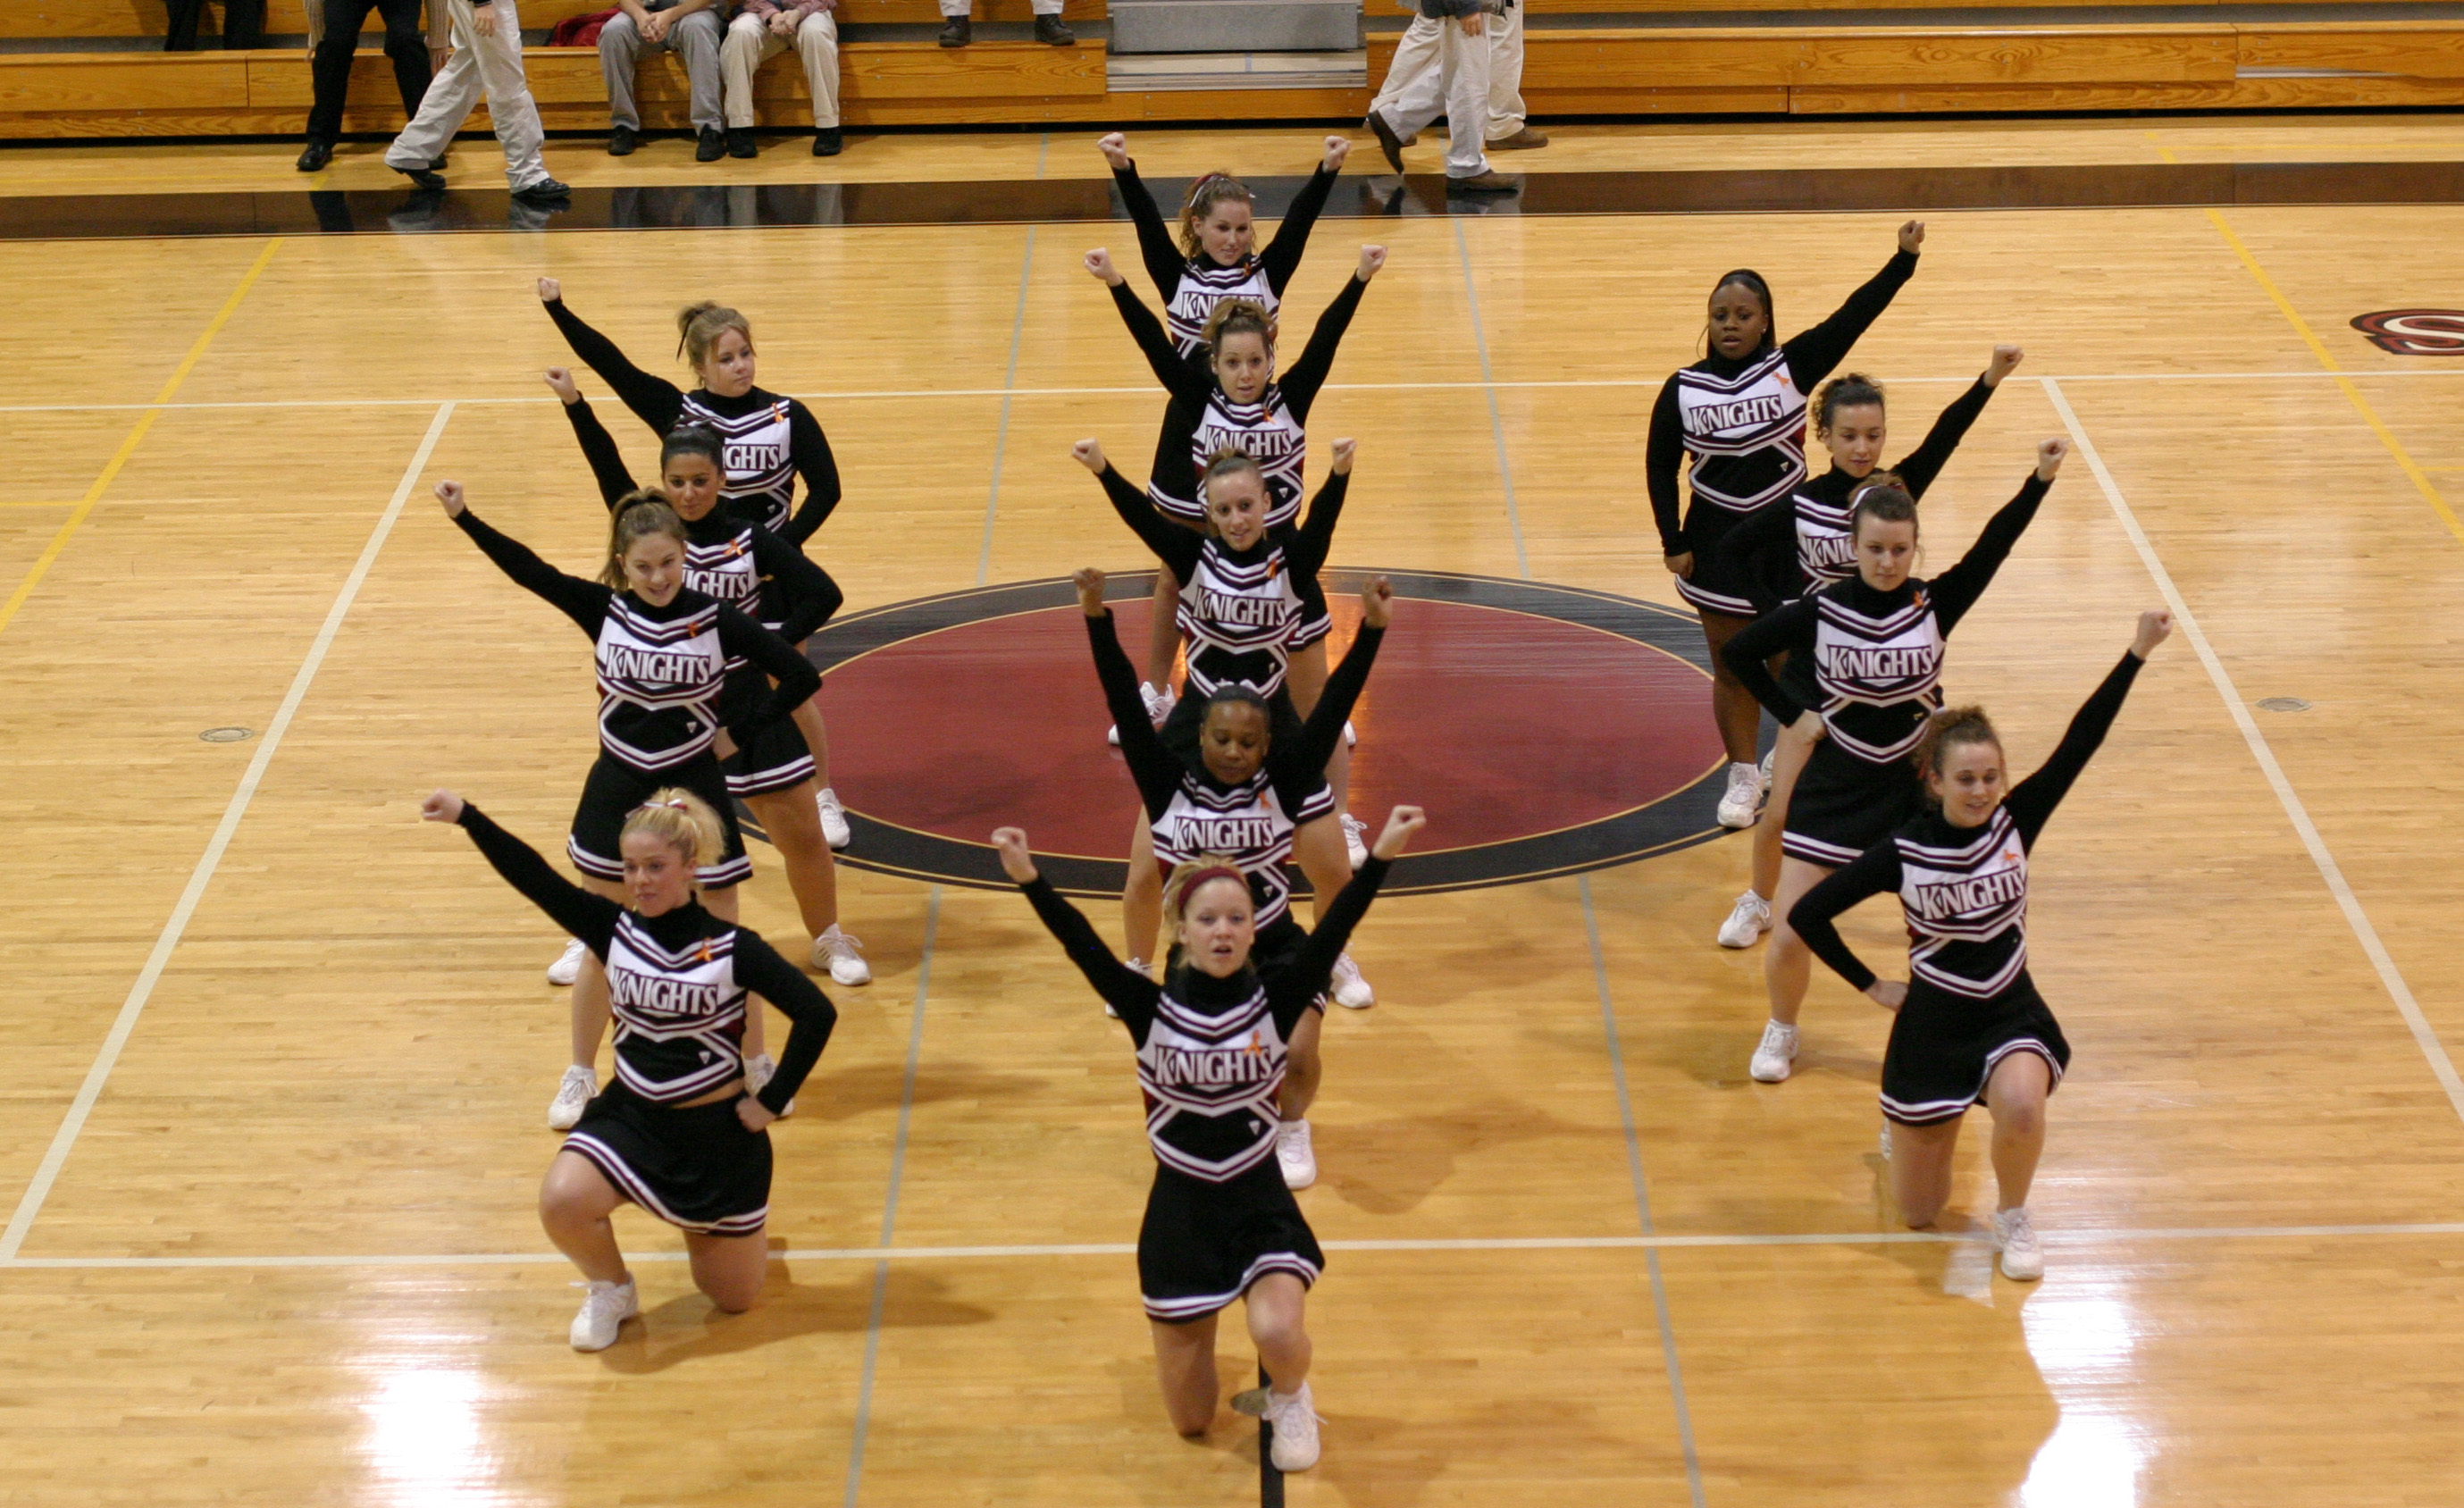 Arcadia University's cheer team performs during a 2005 basketball game.